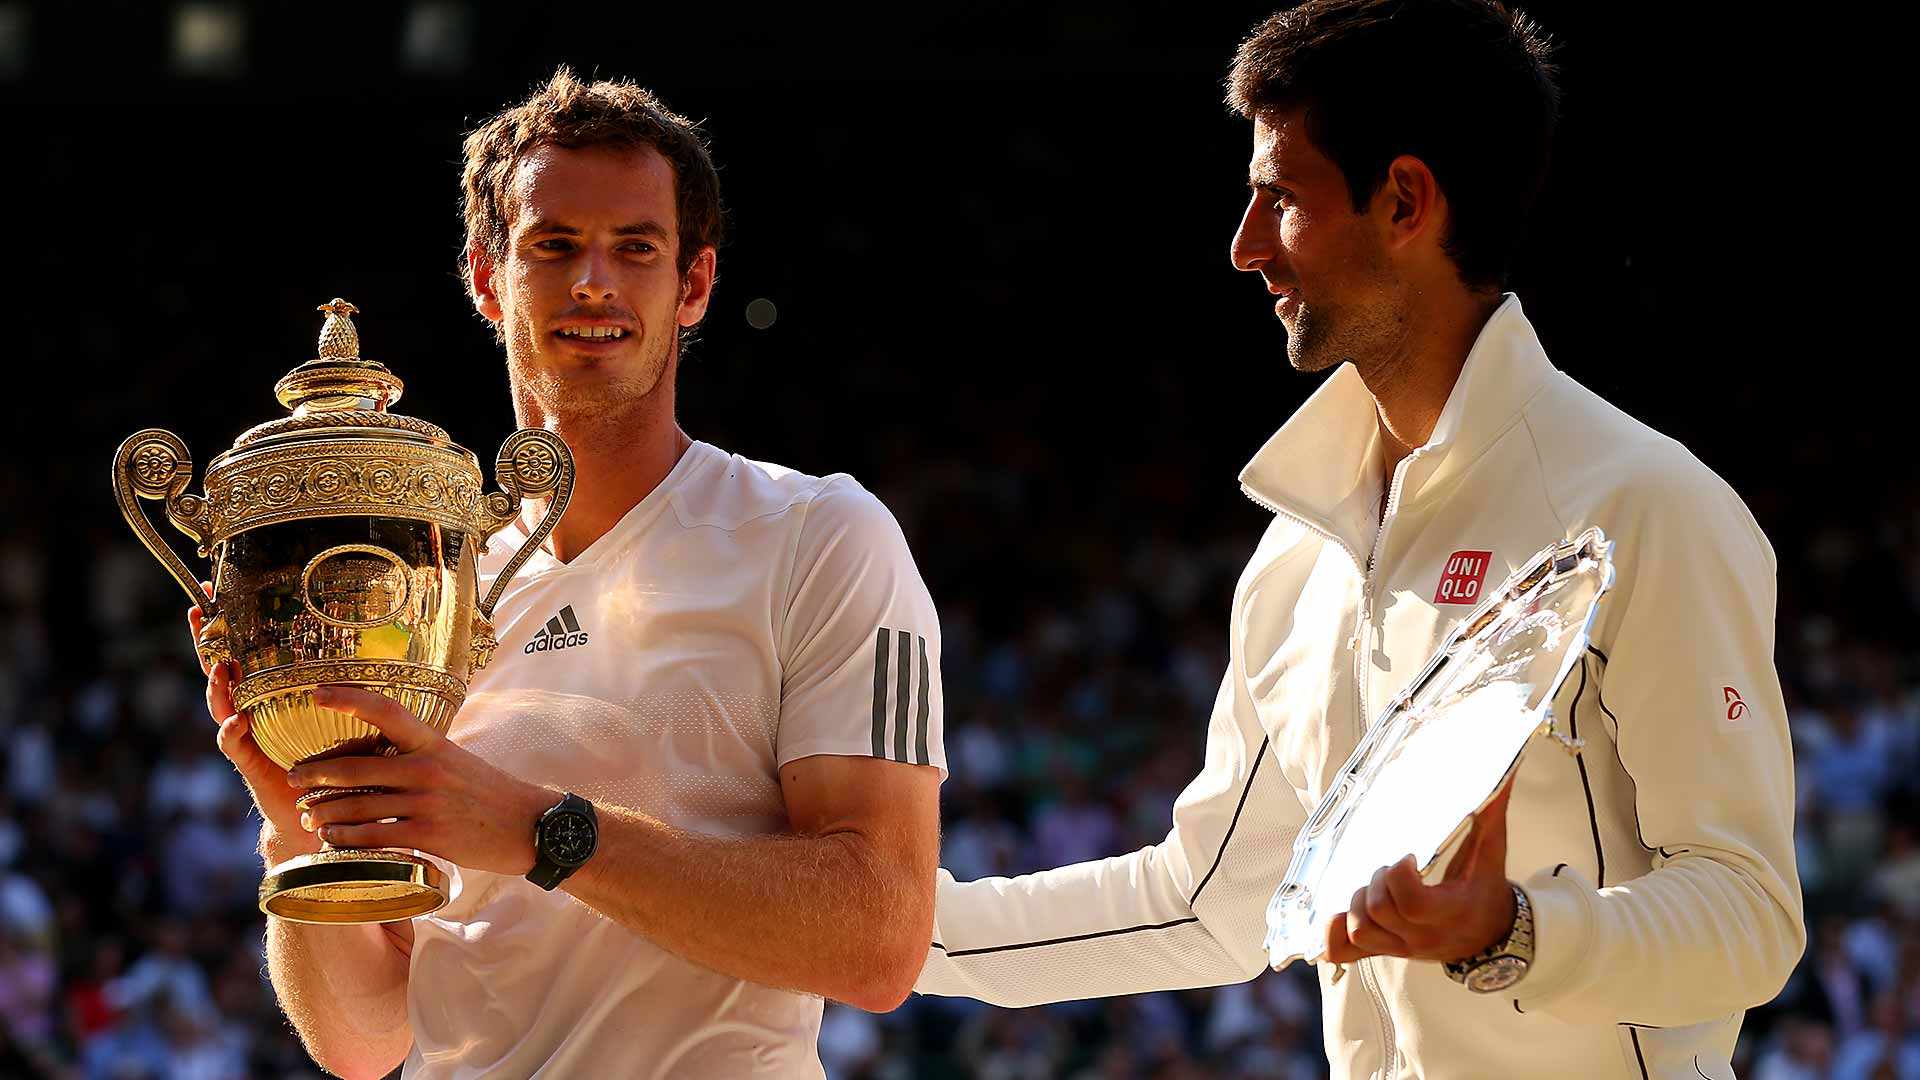 Andy Murray is congratulated by Novak Djokovic after his triumph in the 2013 Wimbledon final.